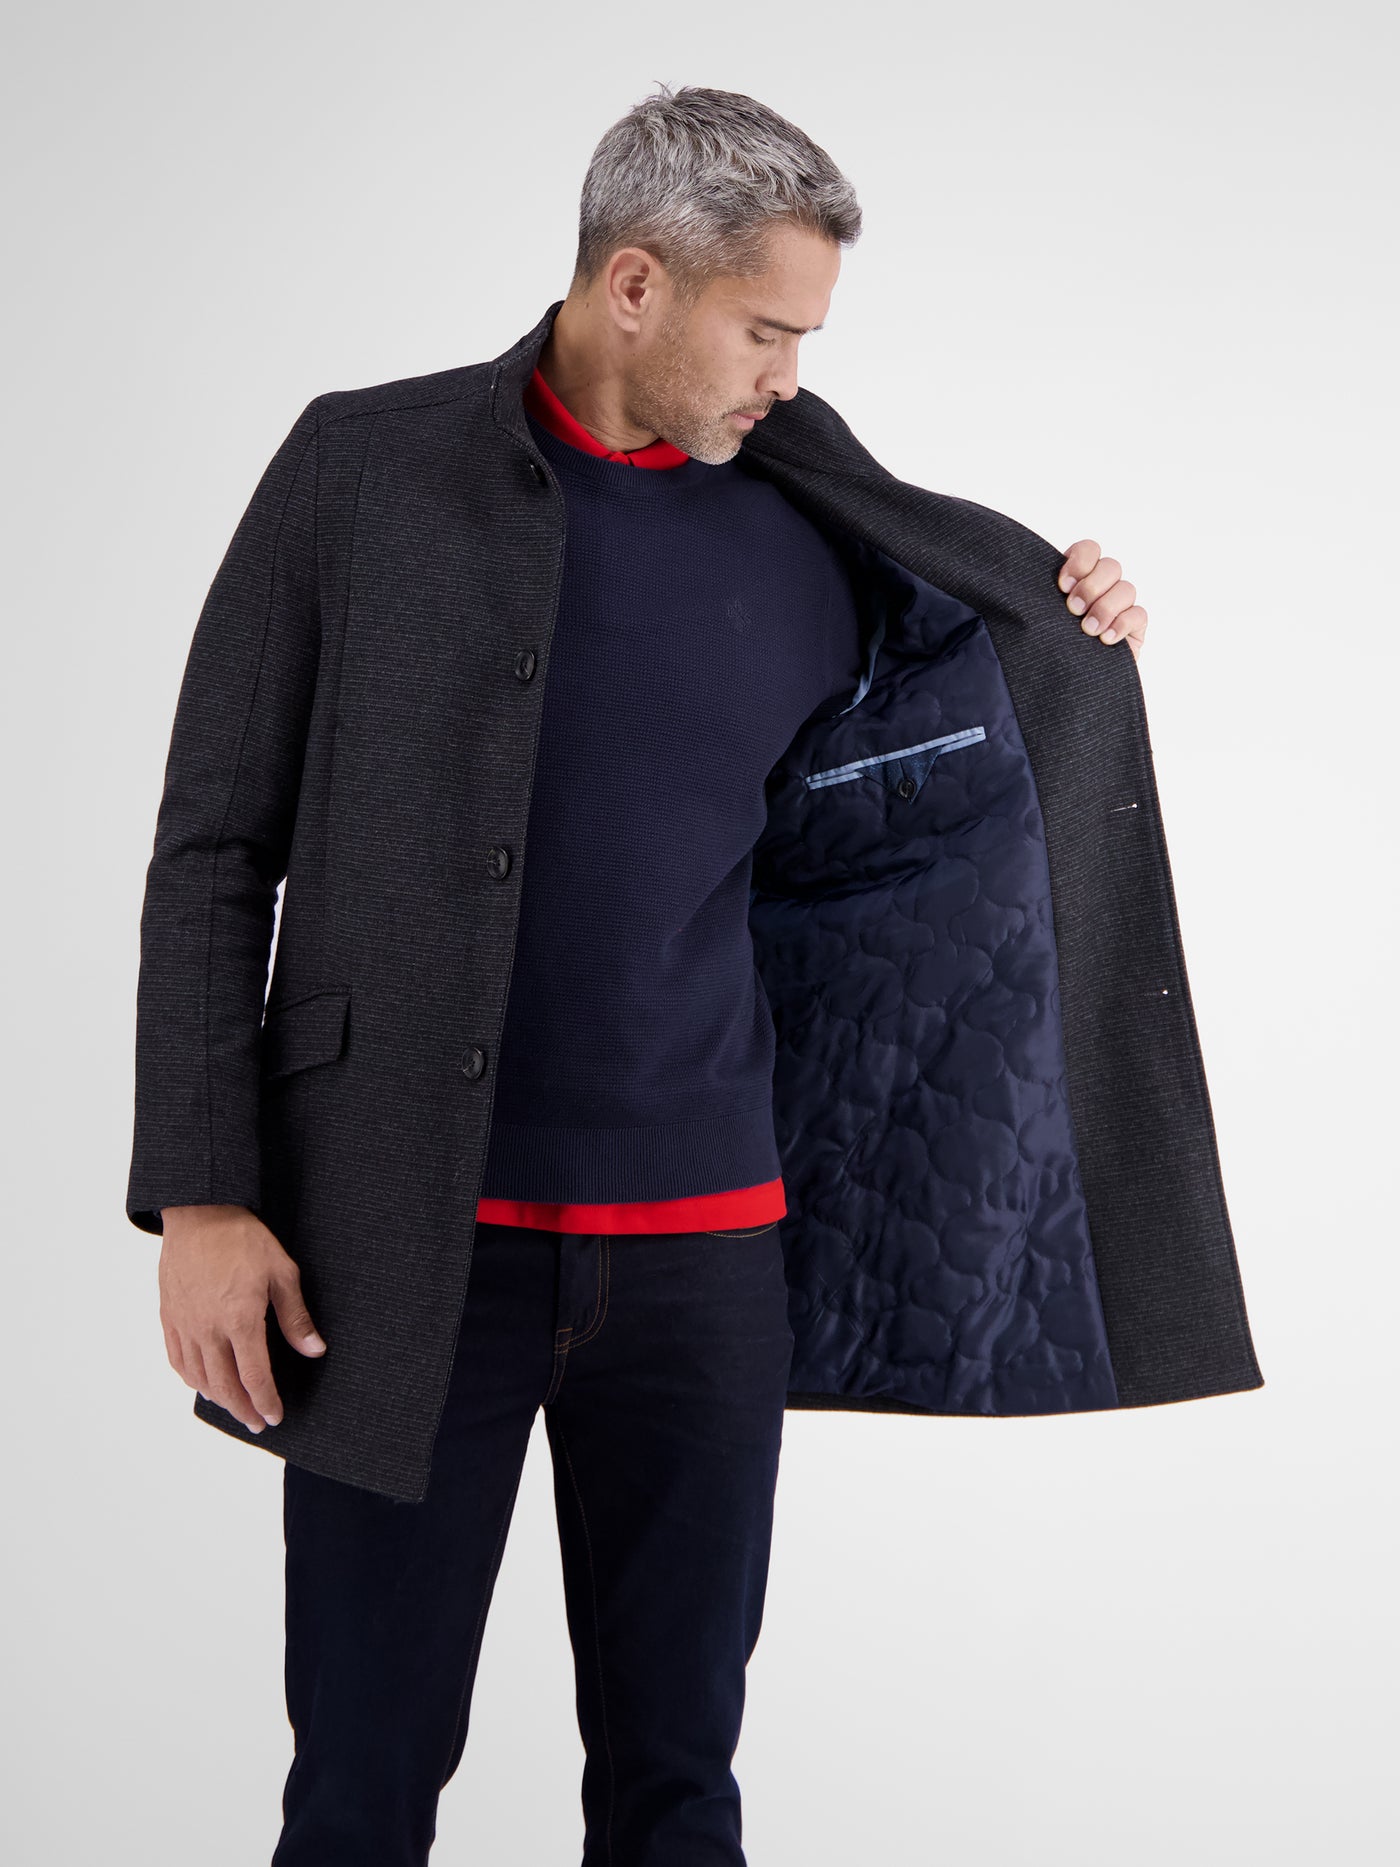 Stand-up collar coat from LRS